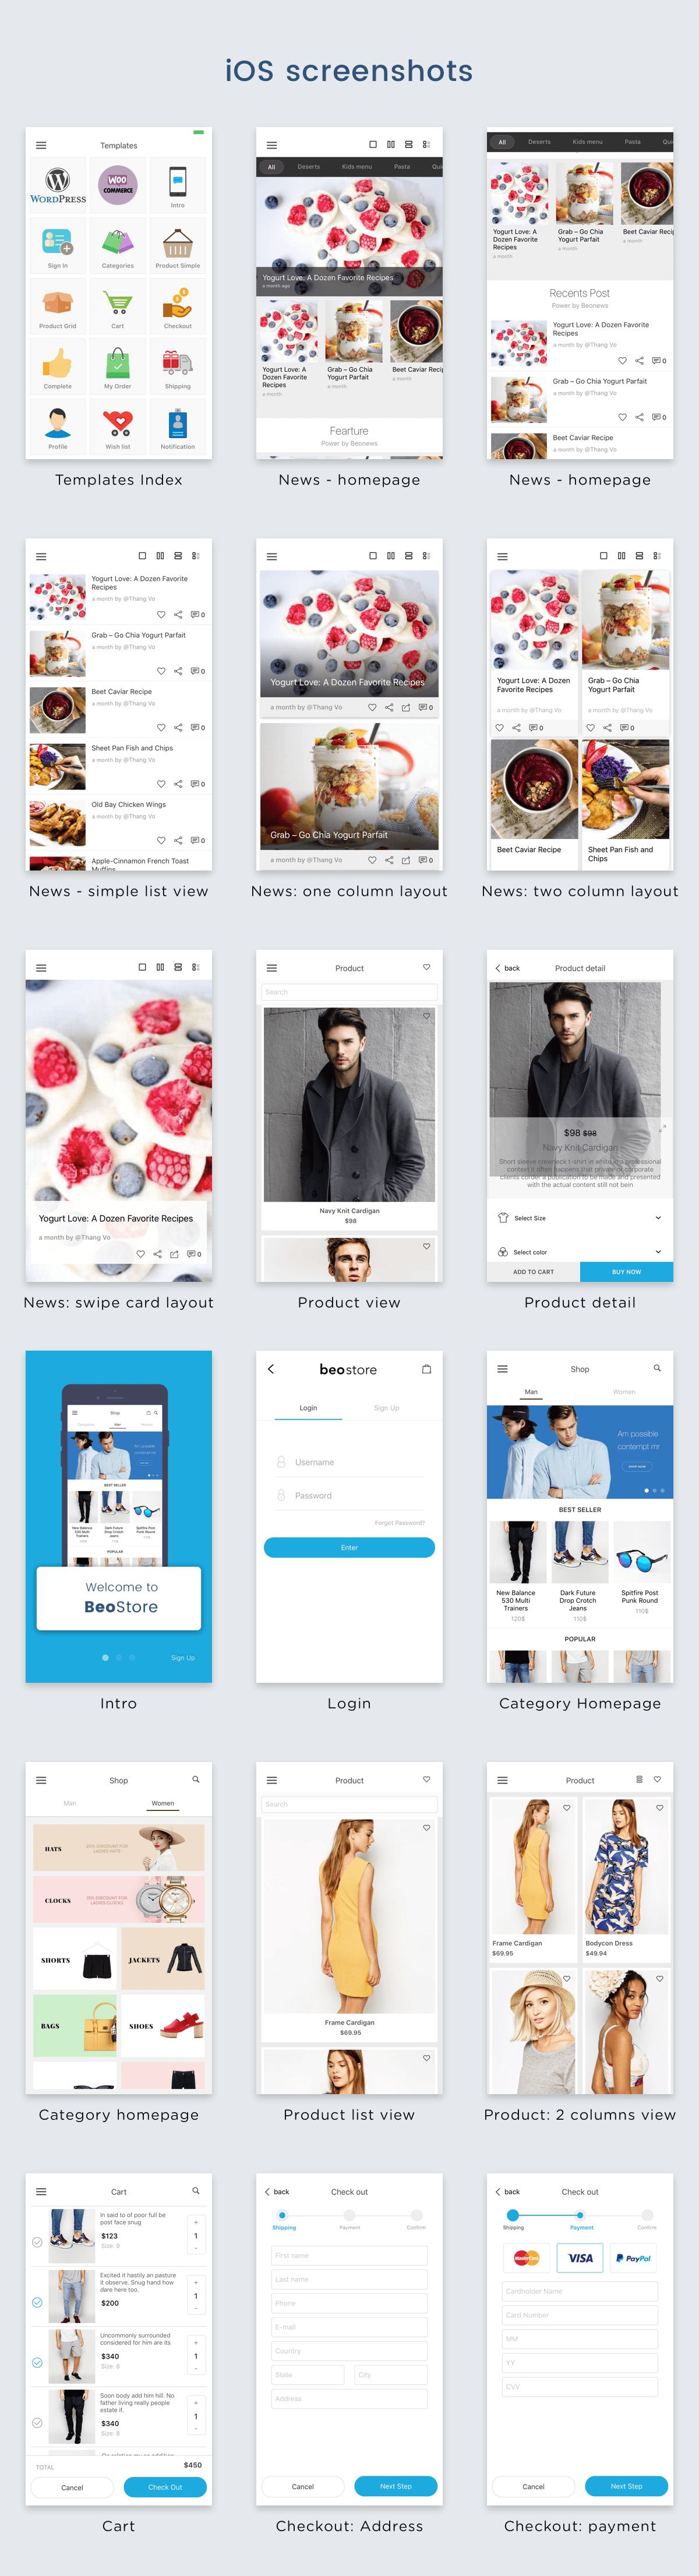 BeoStore - Complete Mobile UI template for React Native - 6